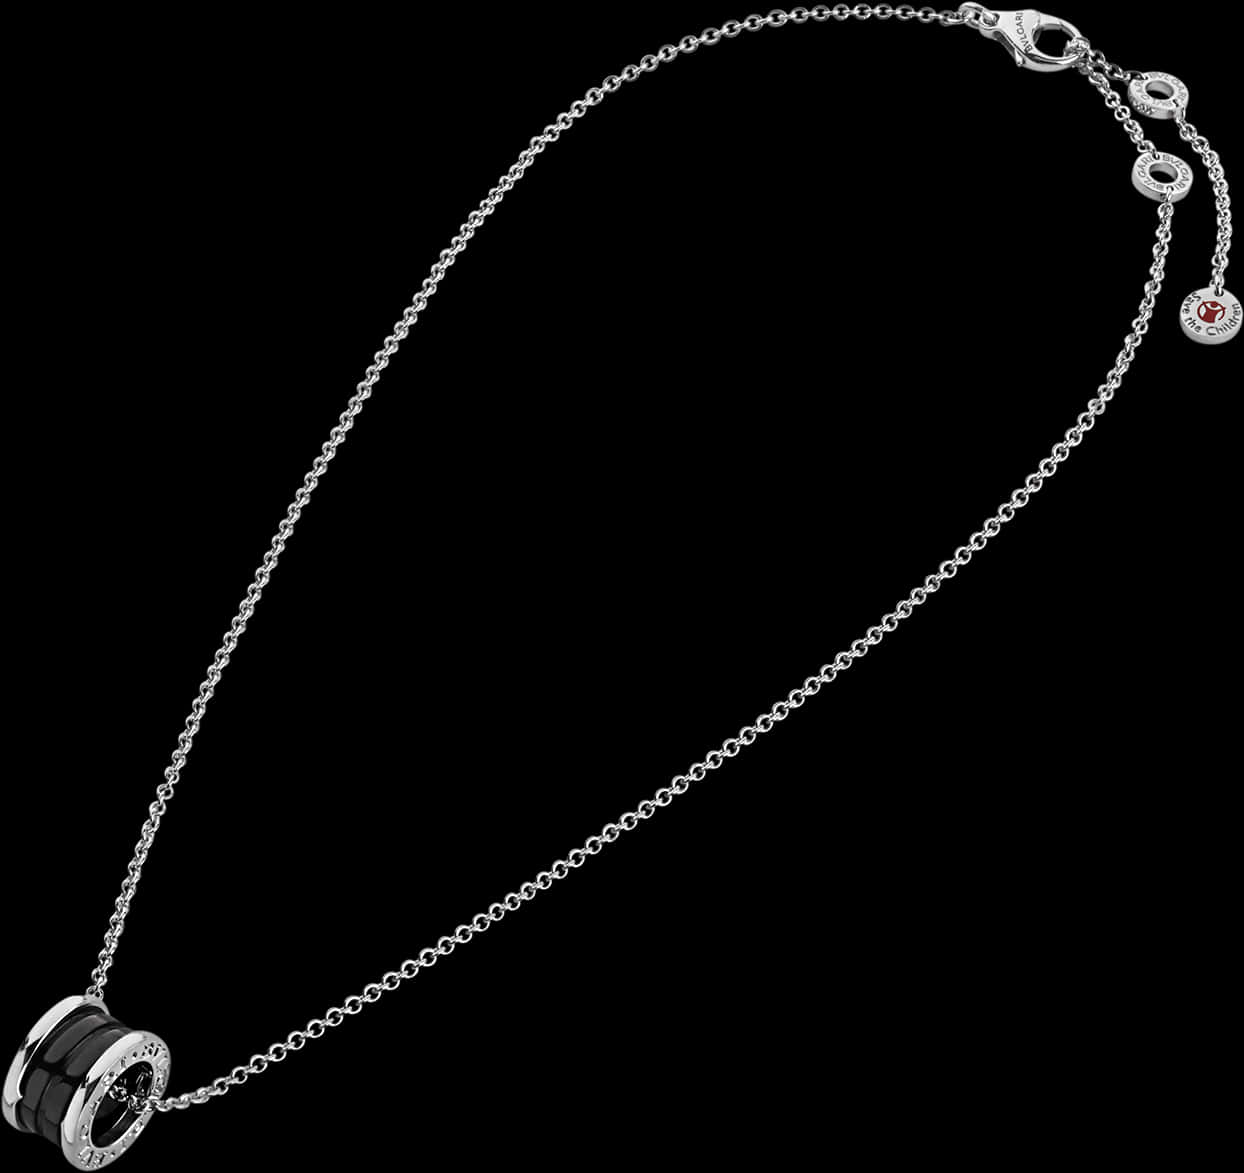 A Silver Necklace With A Black And White Pendant